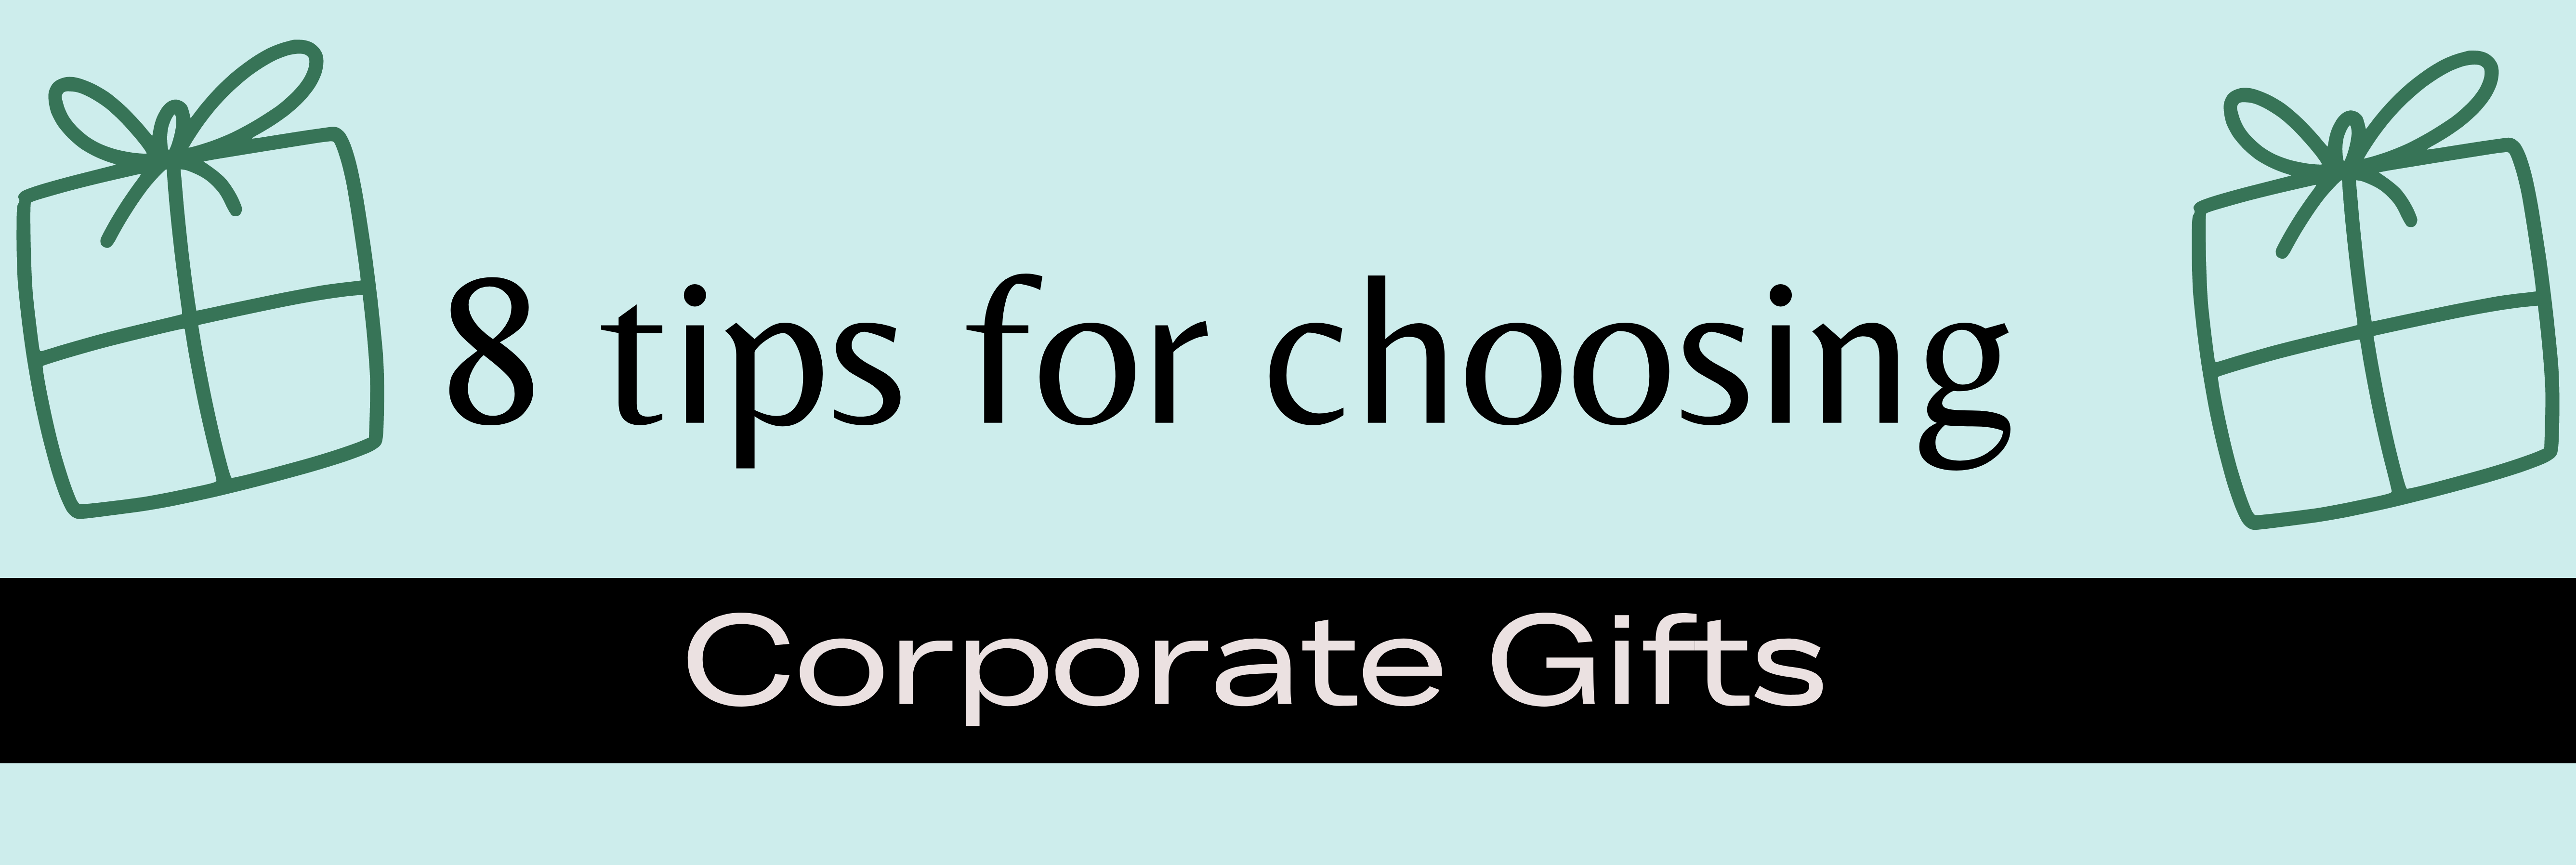 8 tips for choosing corporate gifts